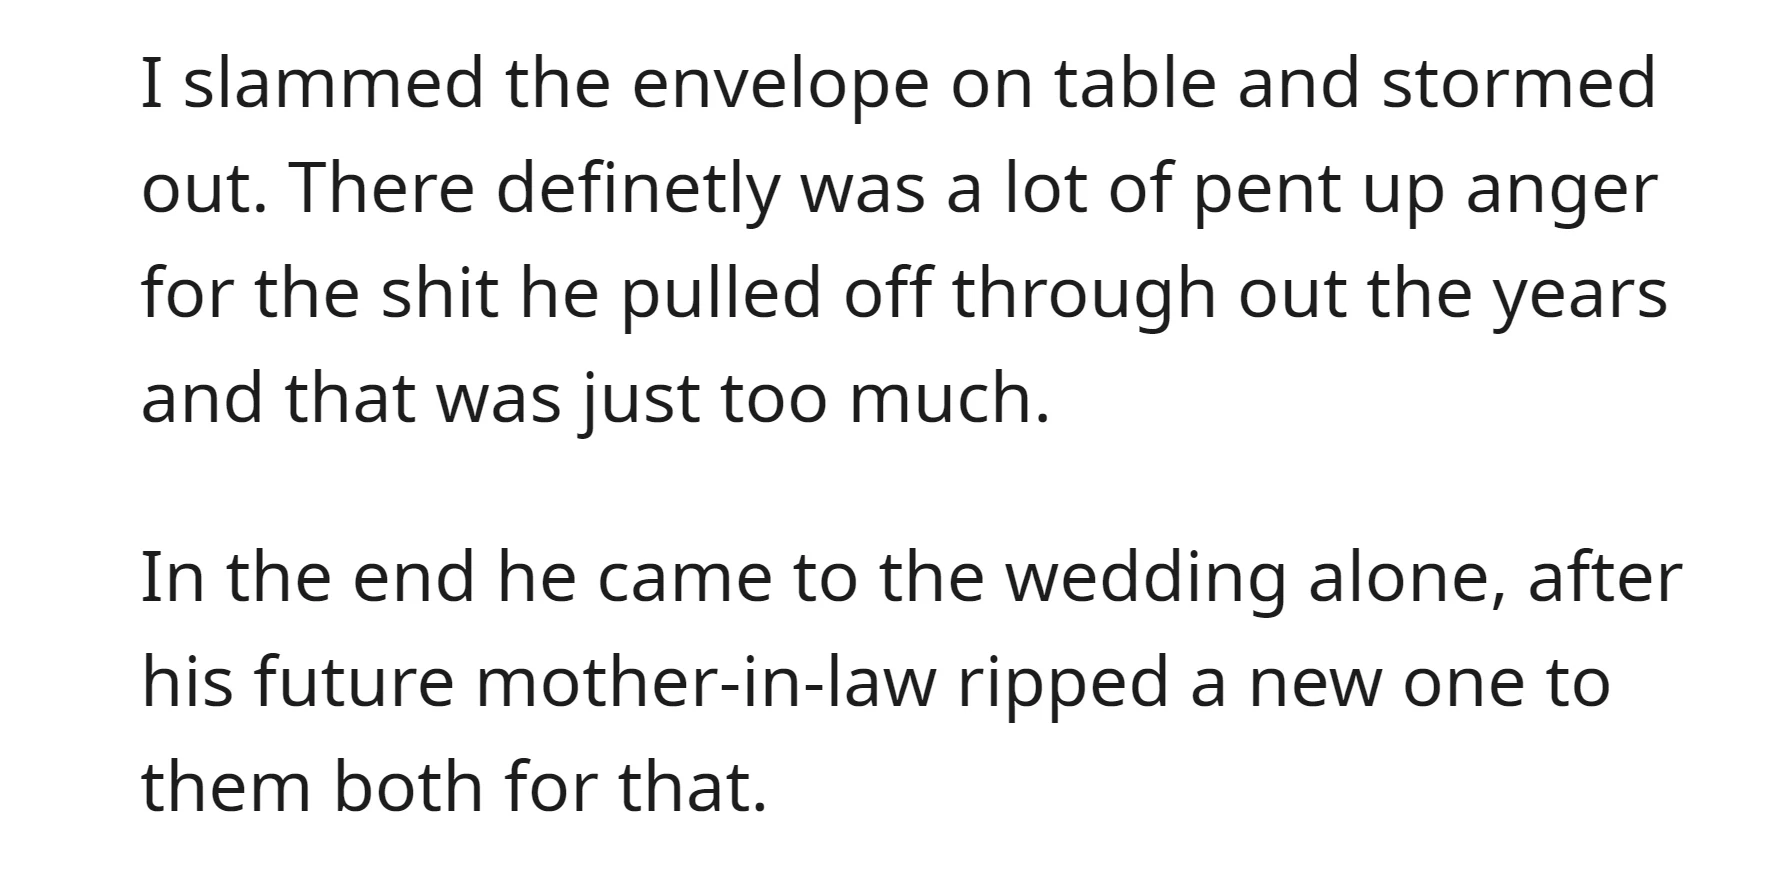 The dad still insisted on OP inviting his girlfriend participating as he gave the OP for the wedding, so she slammed the envelope on the table and stormed out